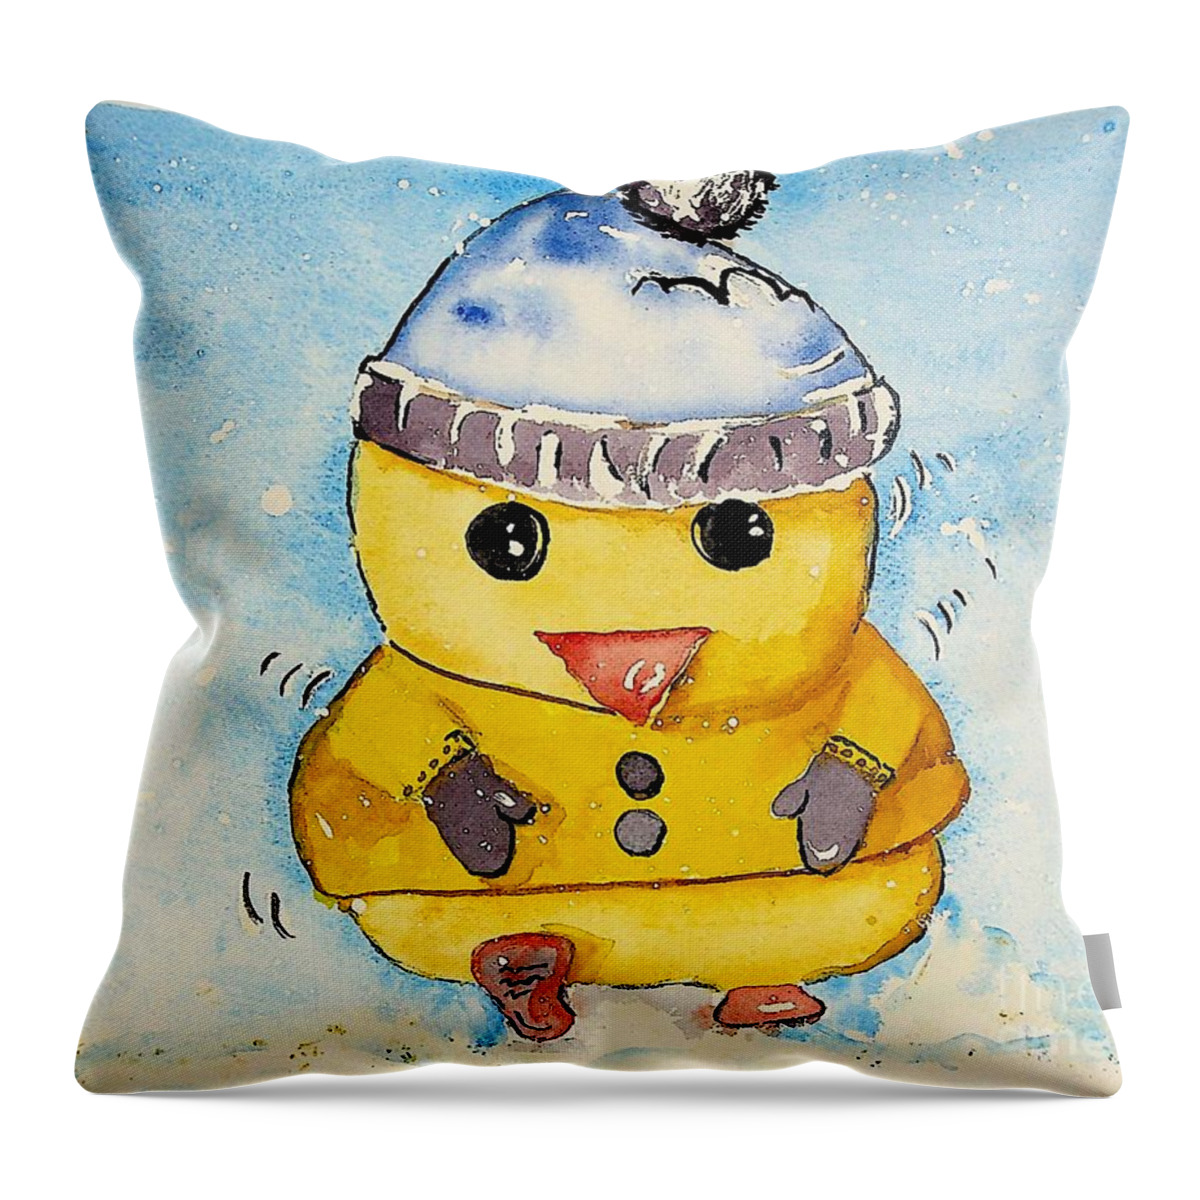 Happy Throw Pillow featuring the painting Happy Duckie Winter by Valerie Shaffer